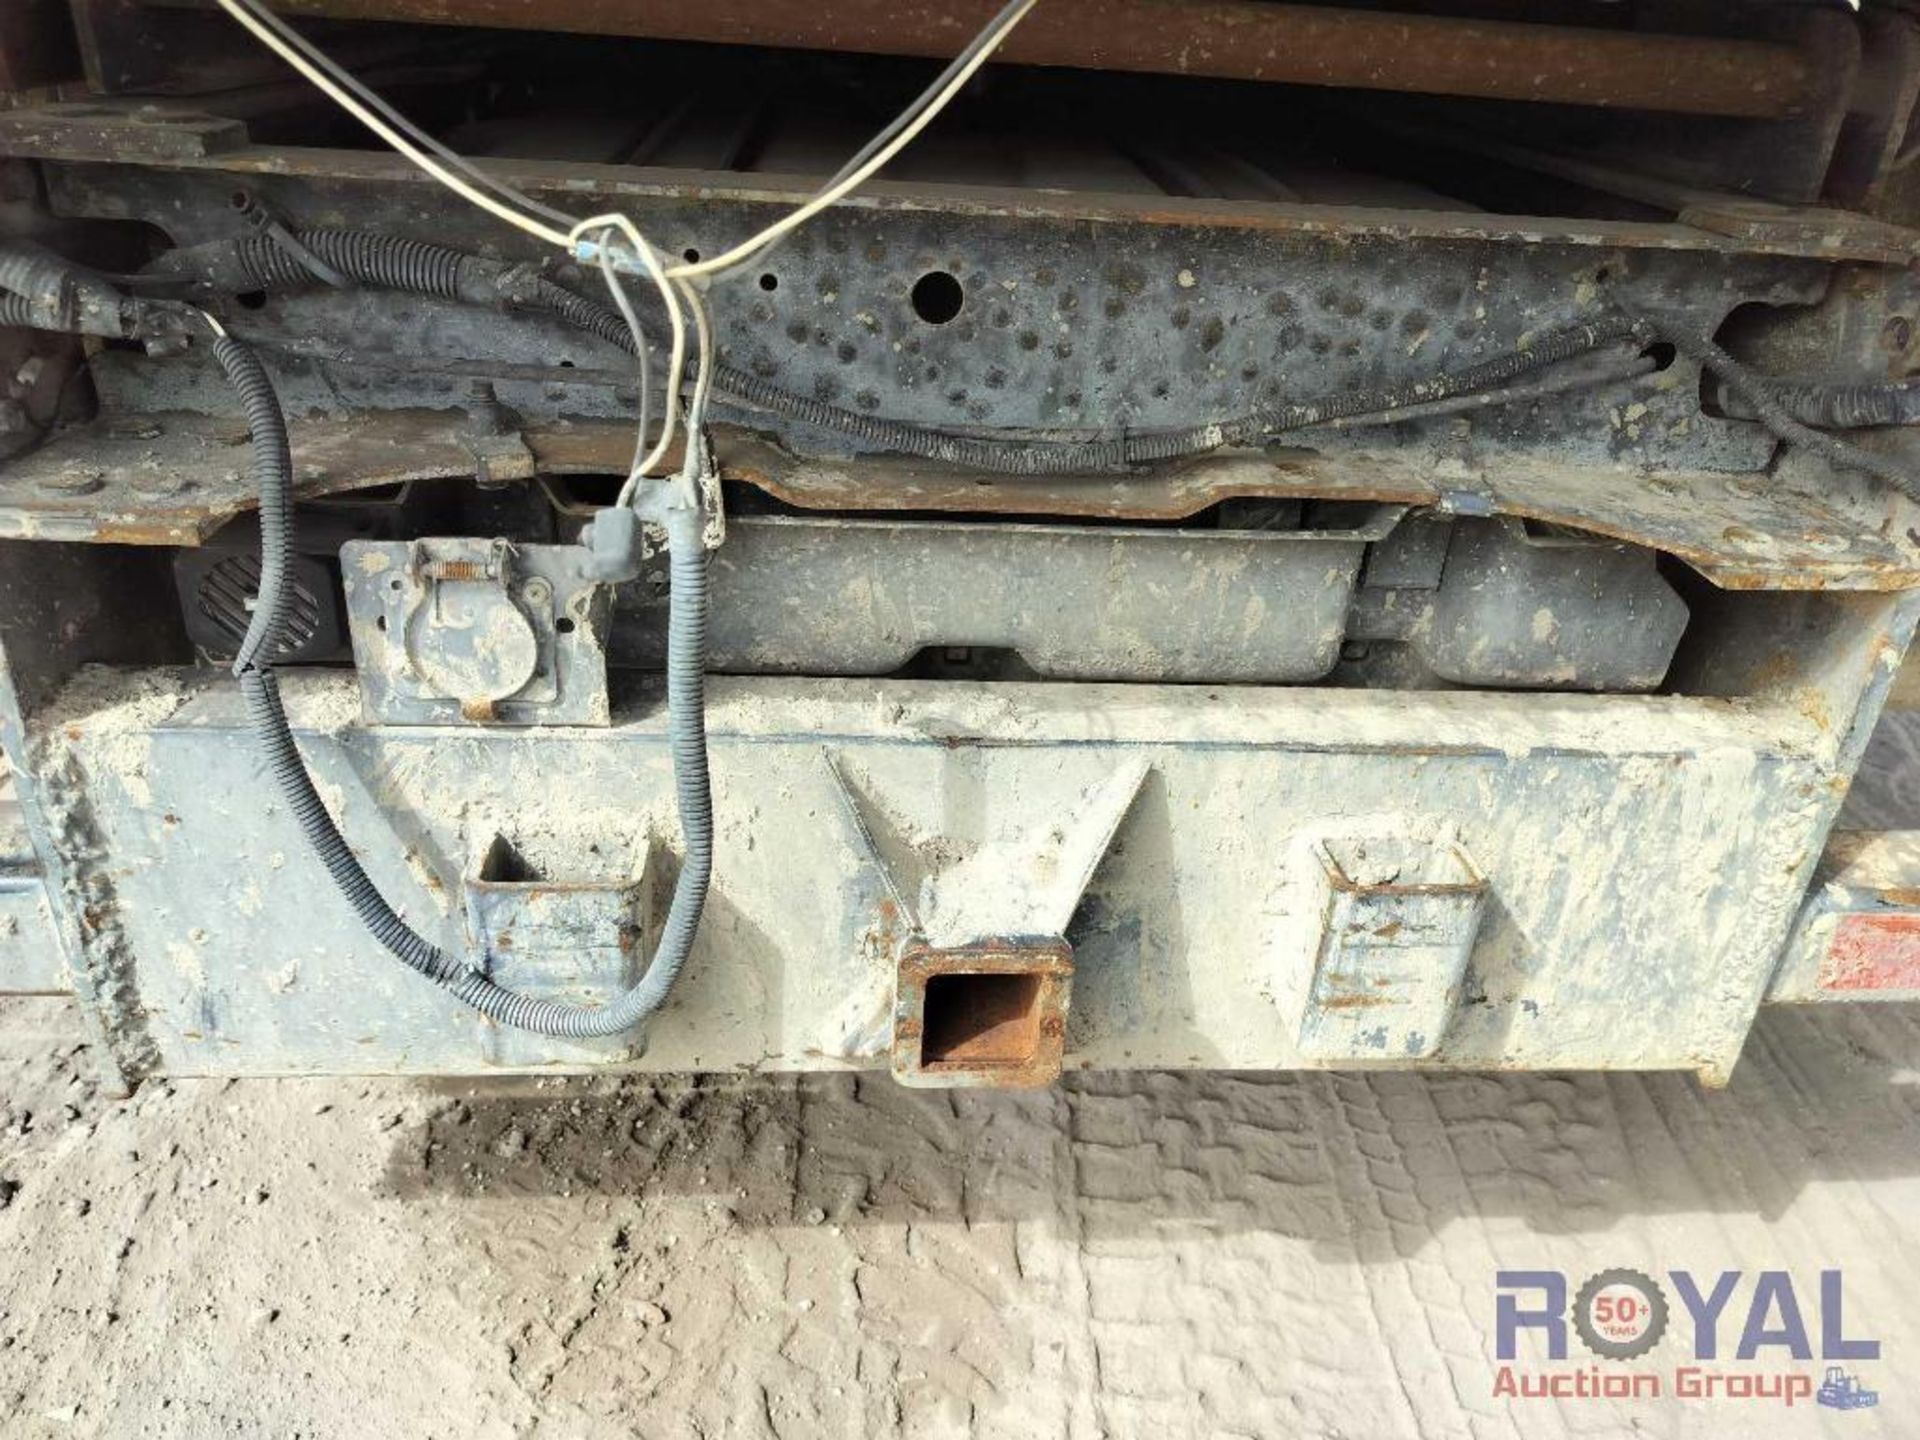 2006 Ford F350 Dump Truck - Image 27 of 27